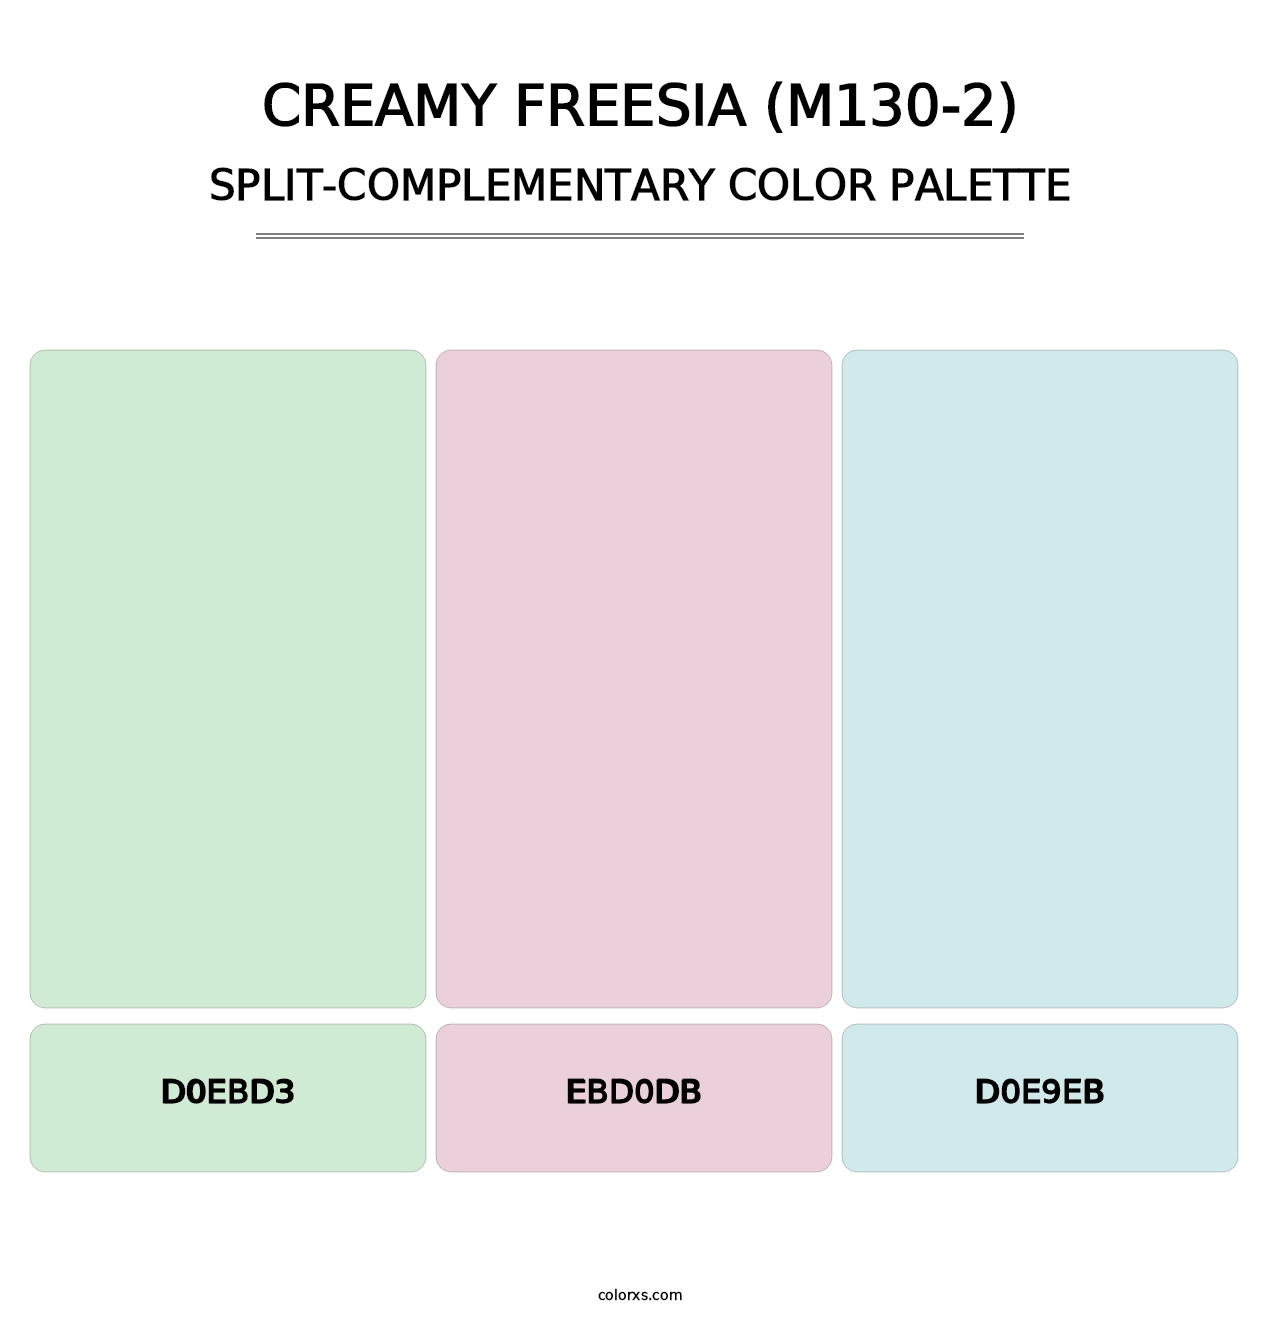 Creamy Freesia (M130-2) - Split-Complementary Color Palette